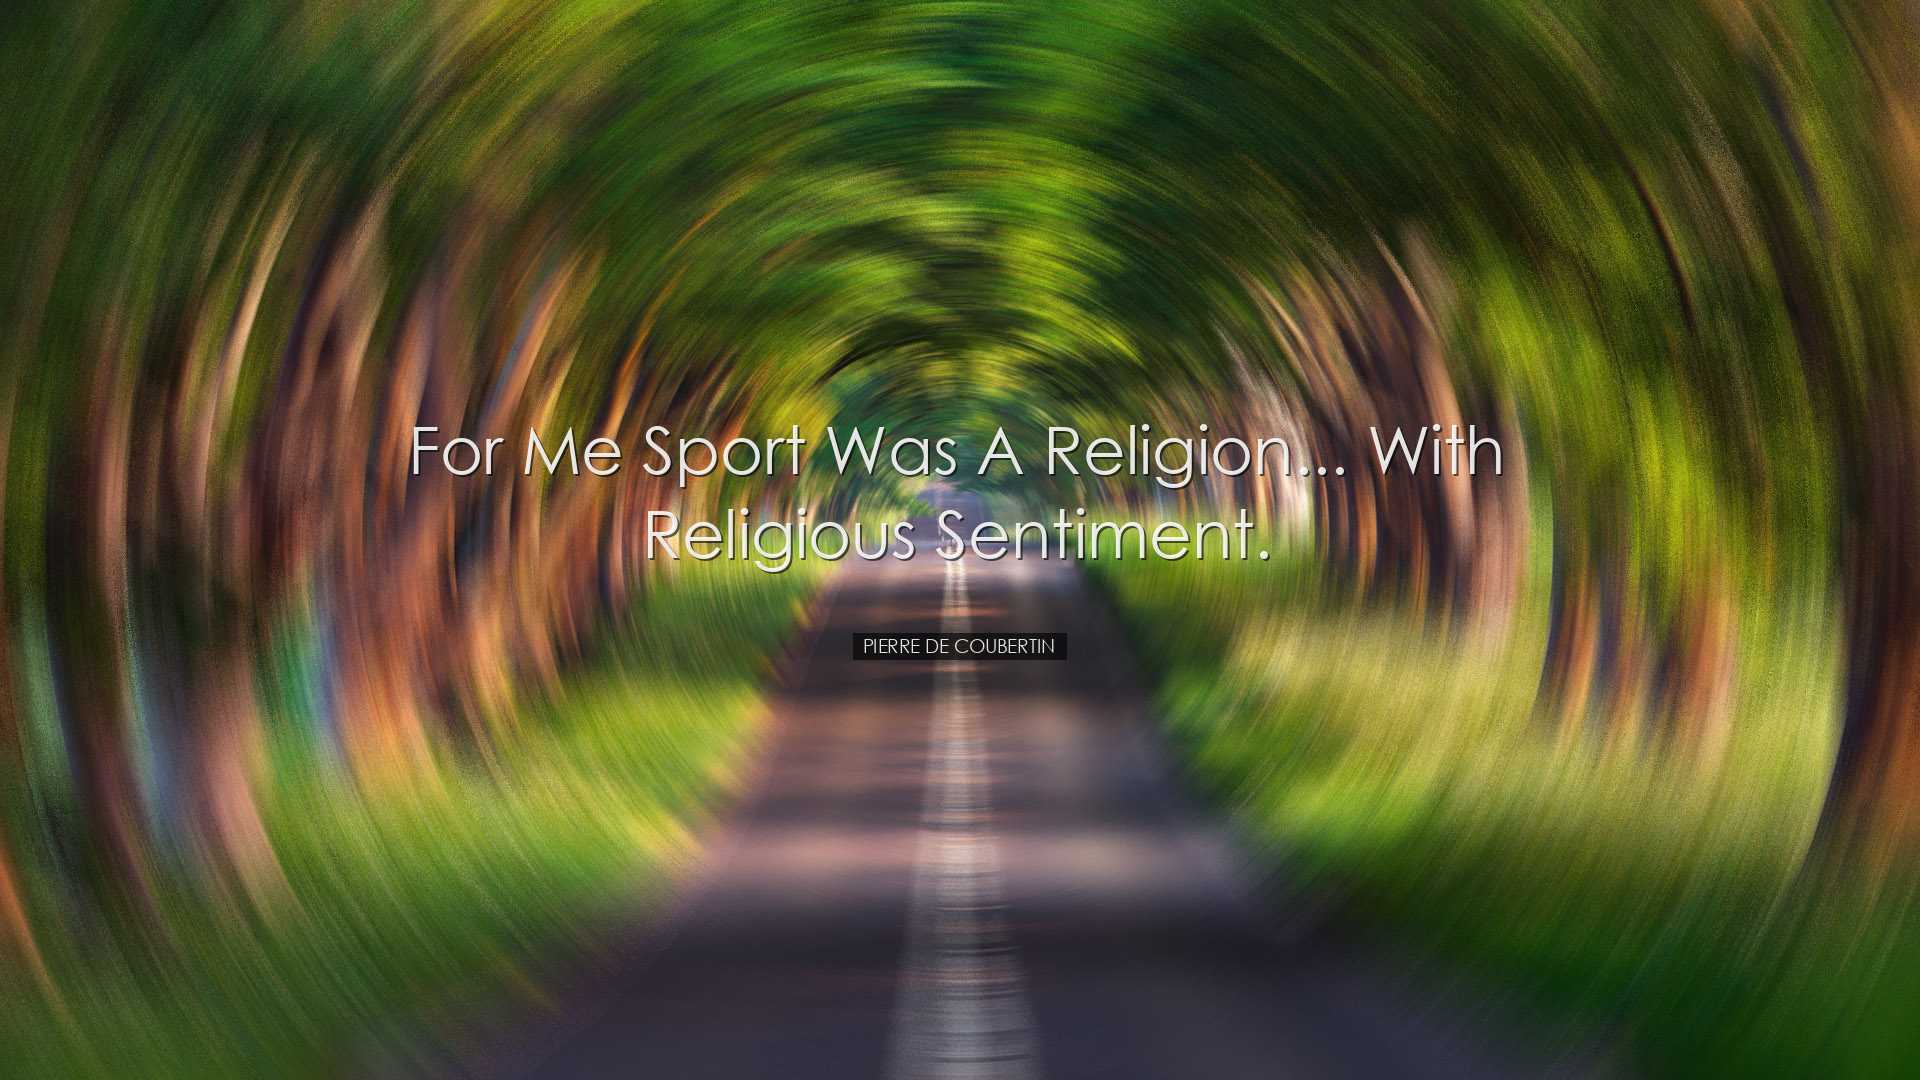 For me sport was a religion... with religious sentiment. - Pierre